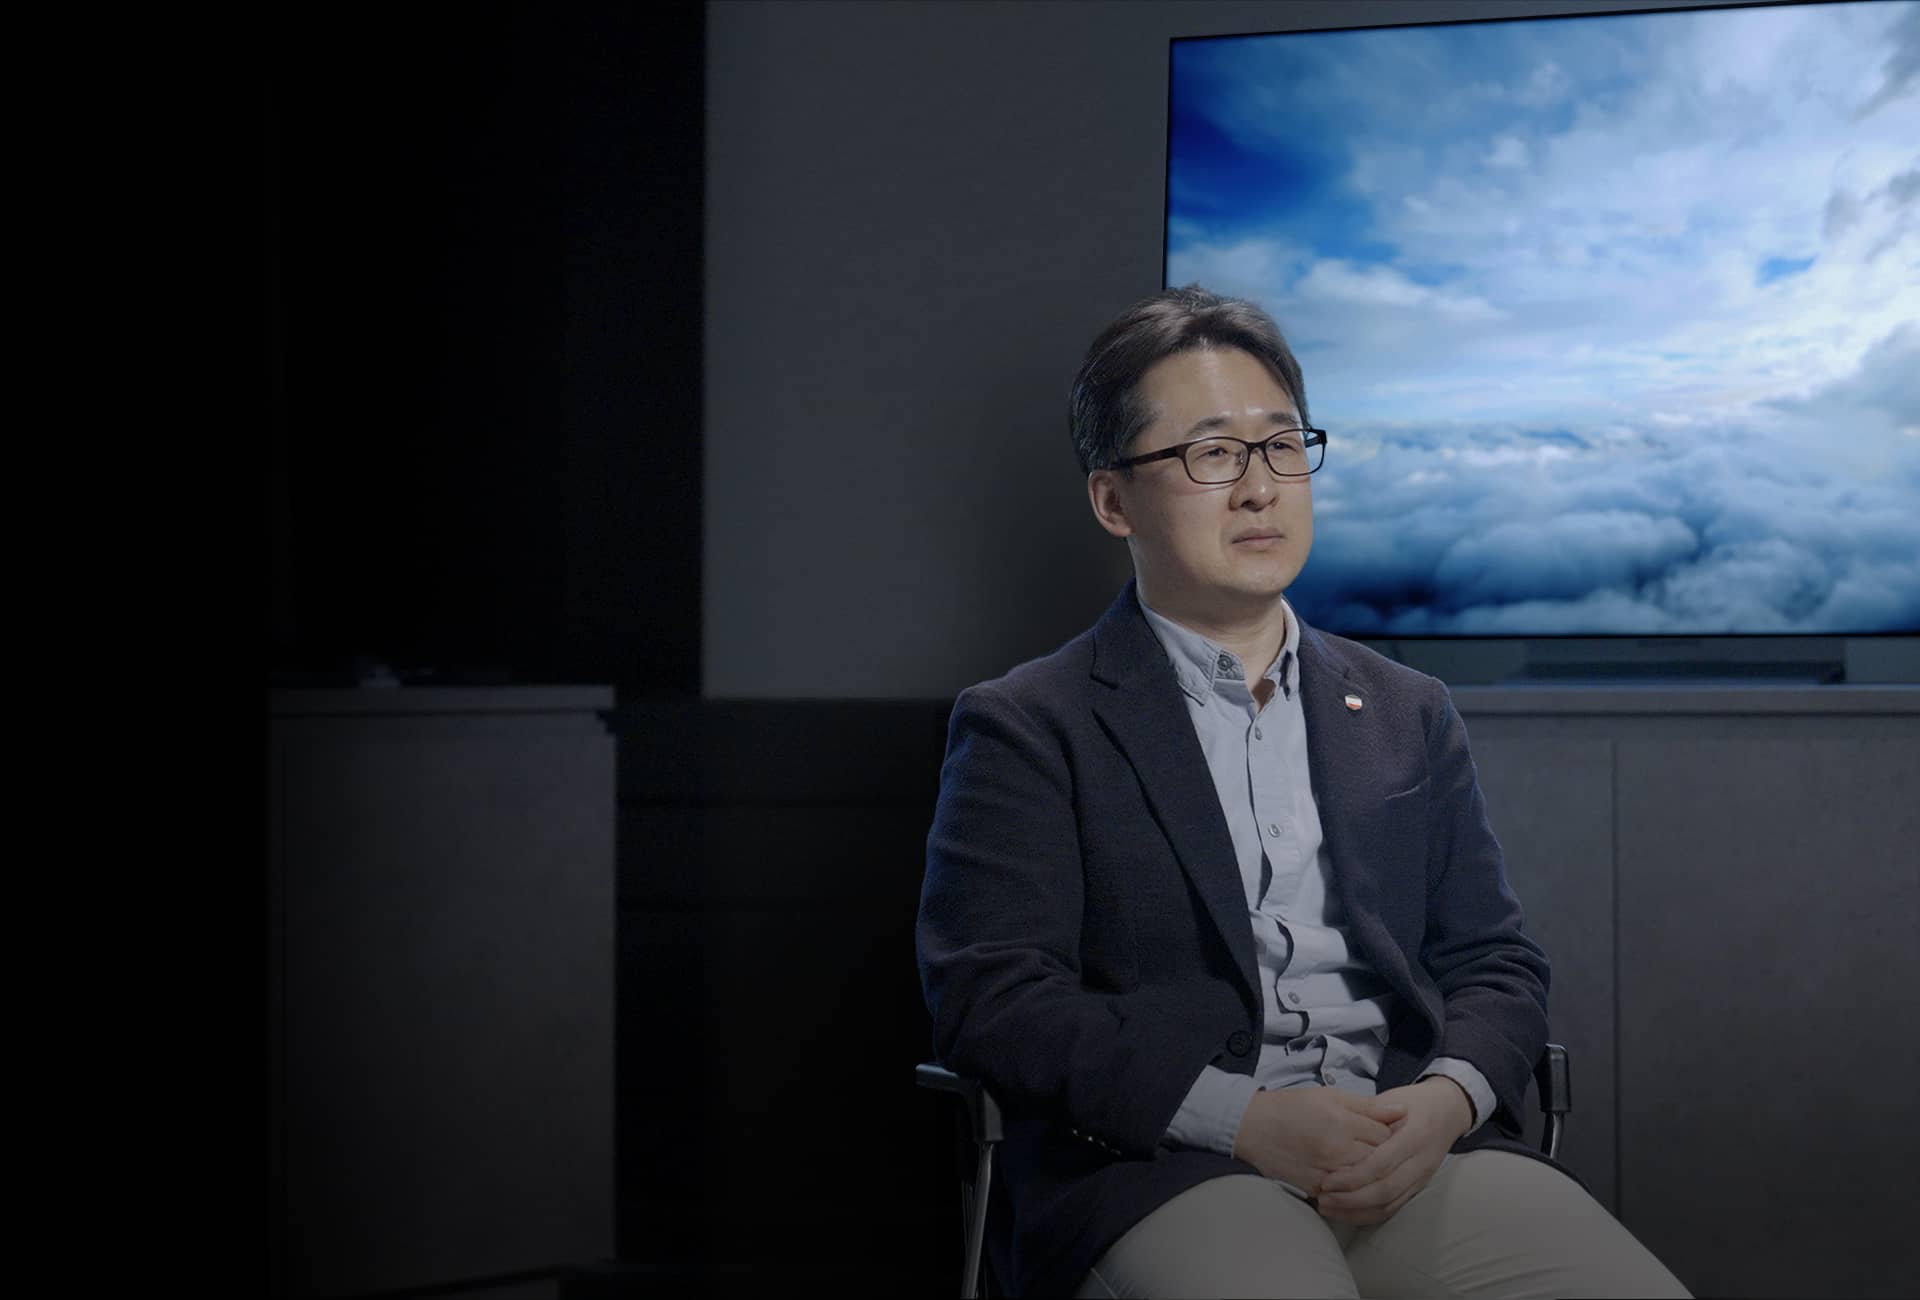 Mr.Kim is sitting in the background of the 3rd Generation META Technology OLED display, which shows cloudy skies.